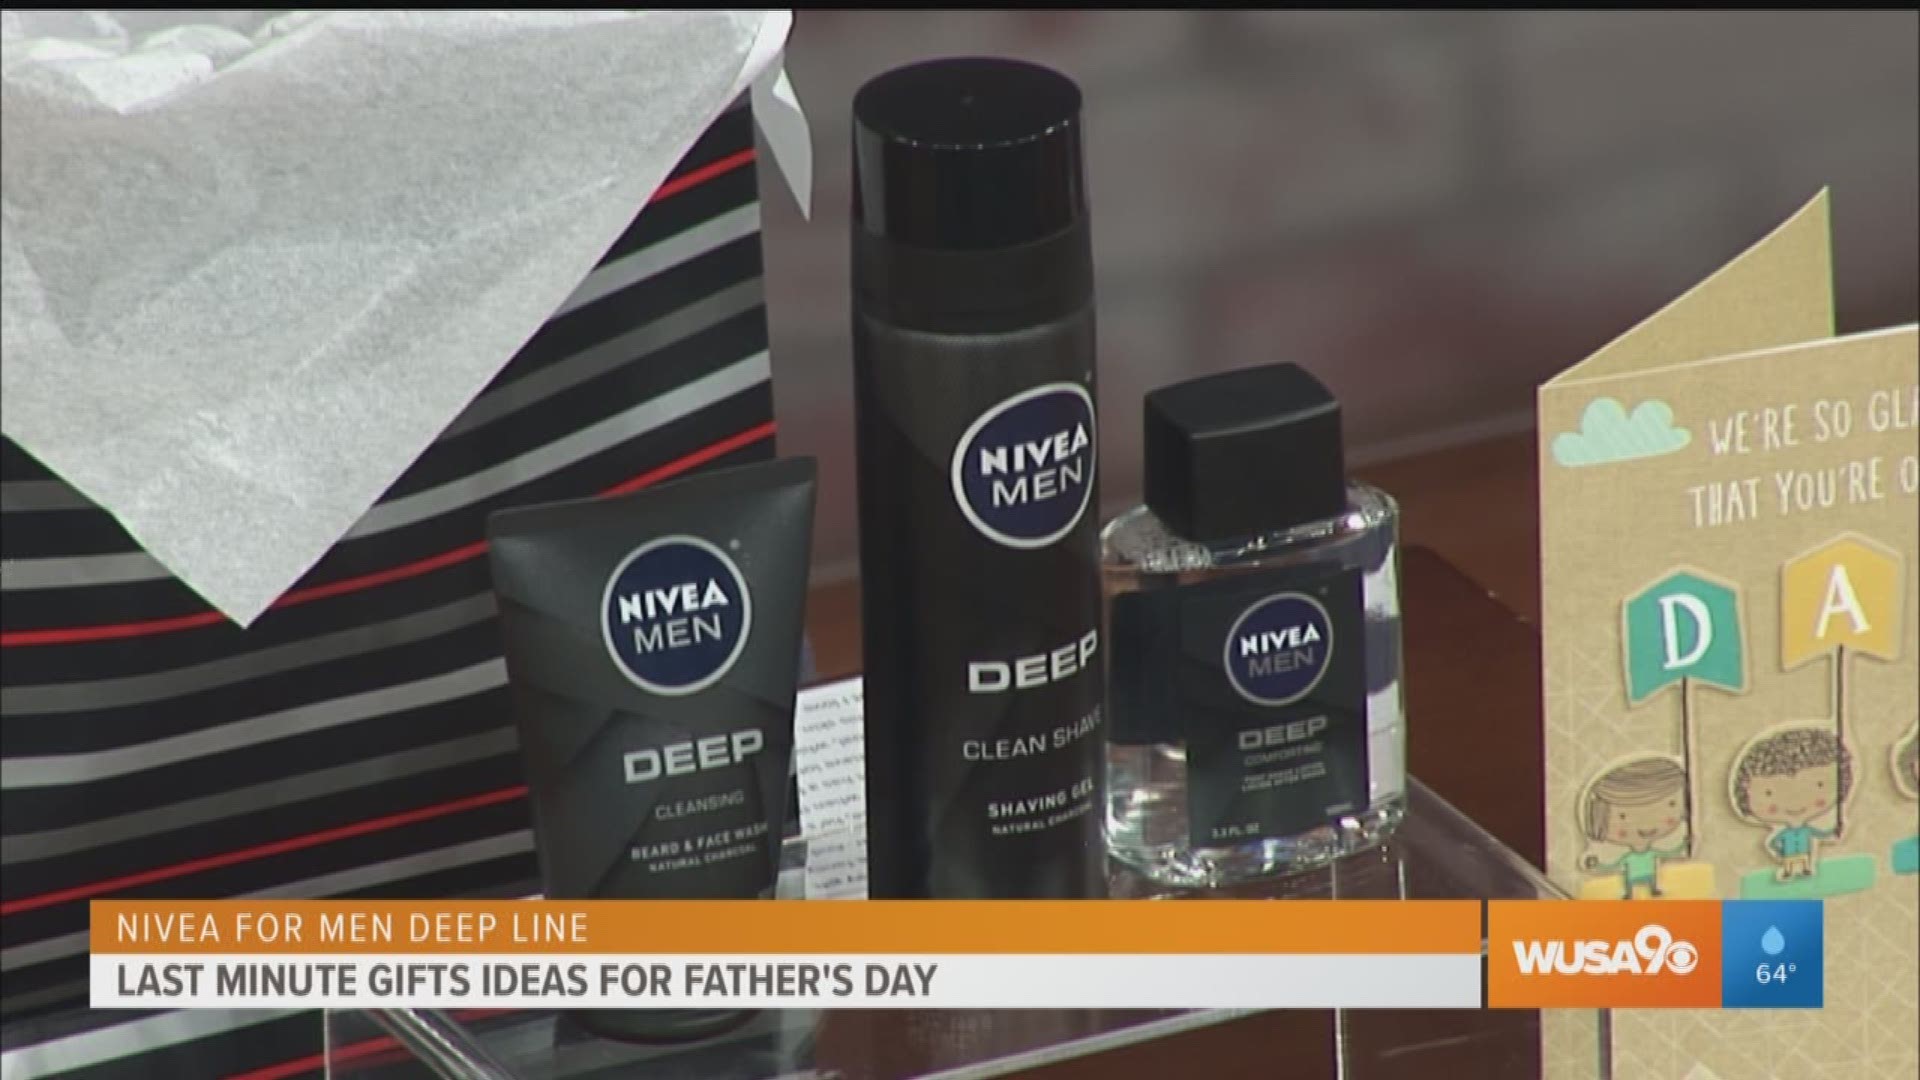 You can't forget dad! Beauty expert, Cheryl Kramer Kaye has some last minute grooming gift ideas for Father's Day.